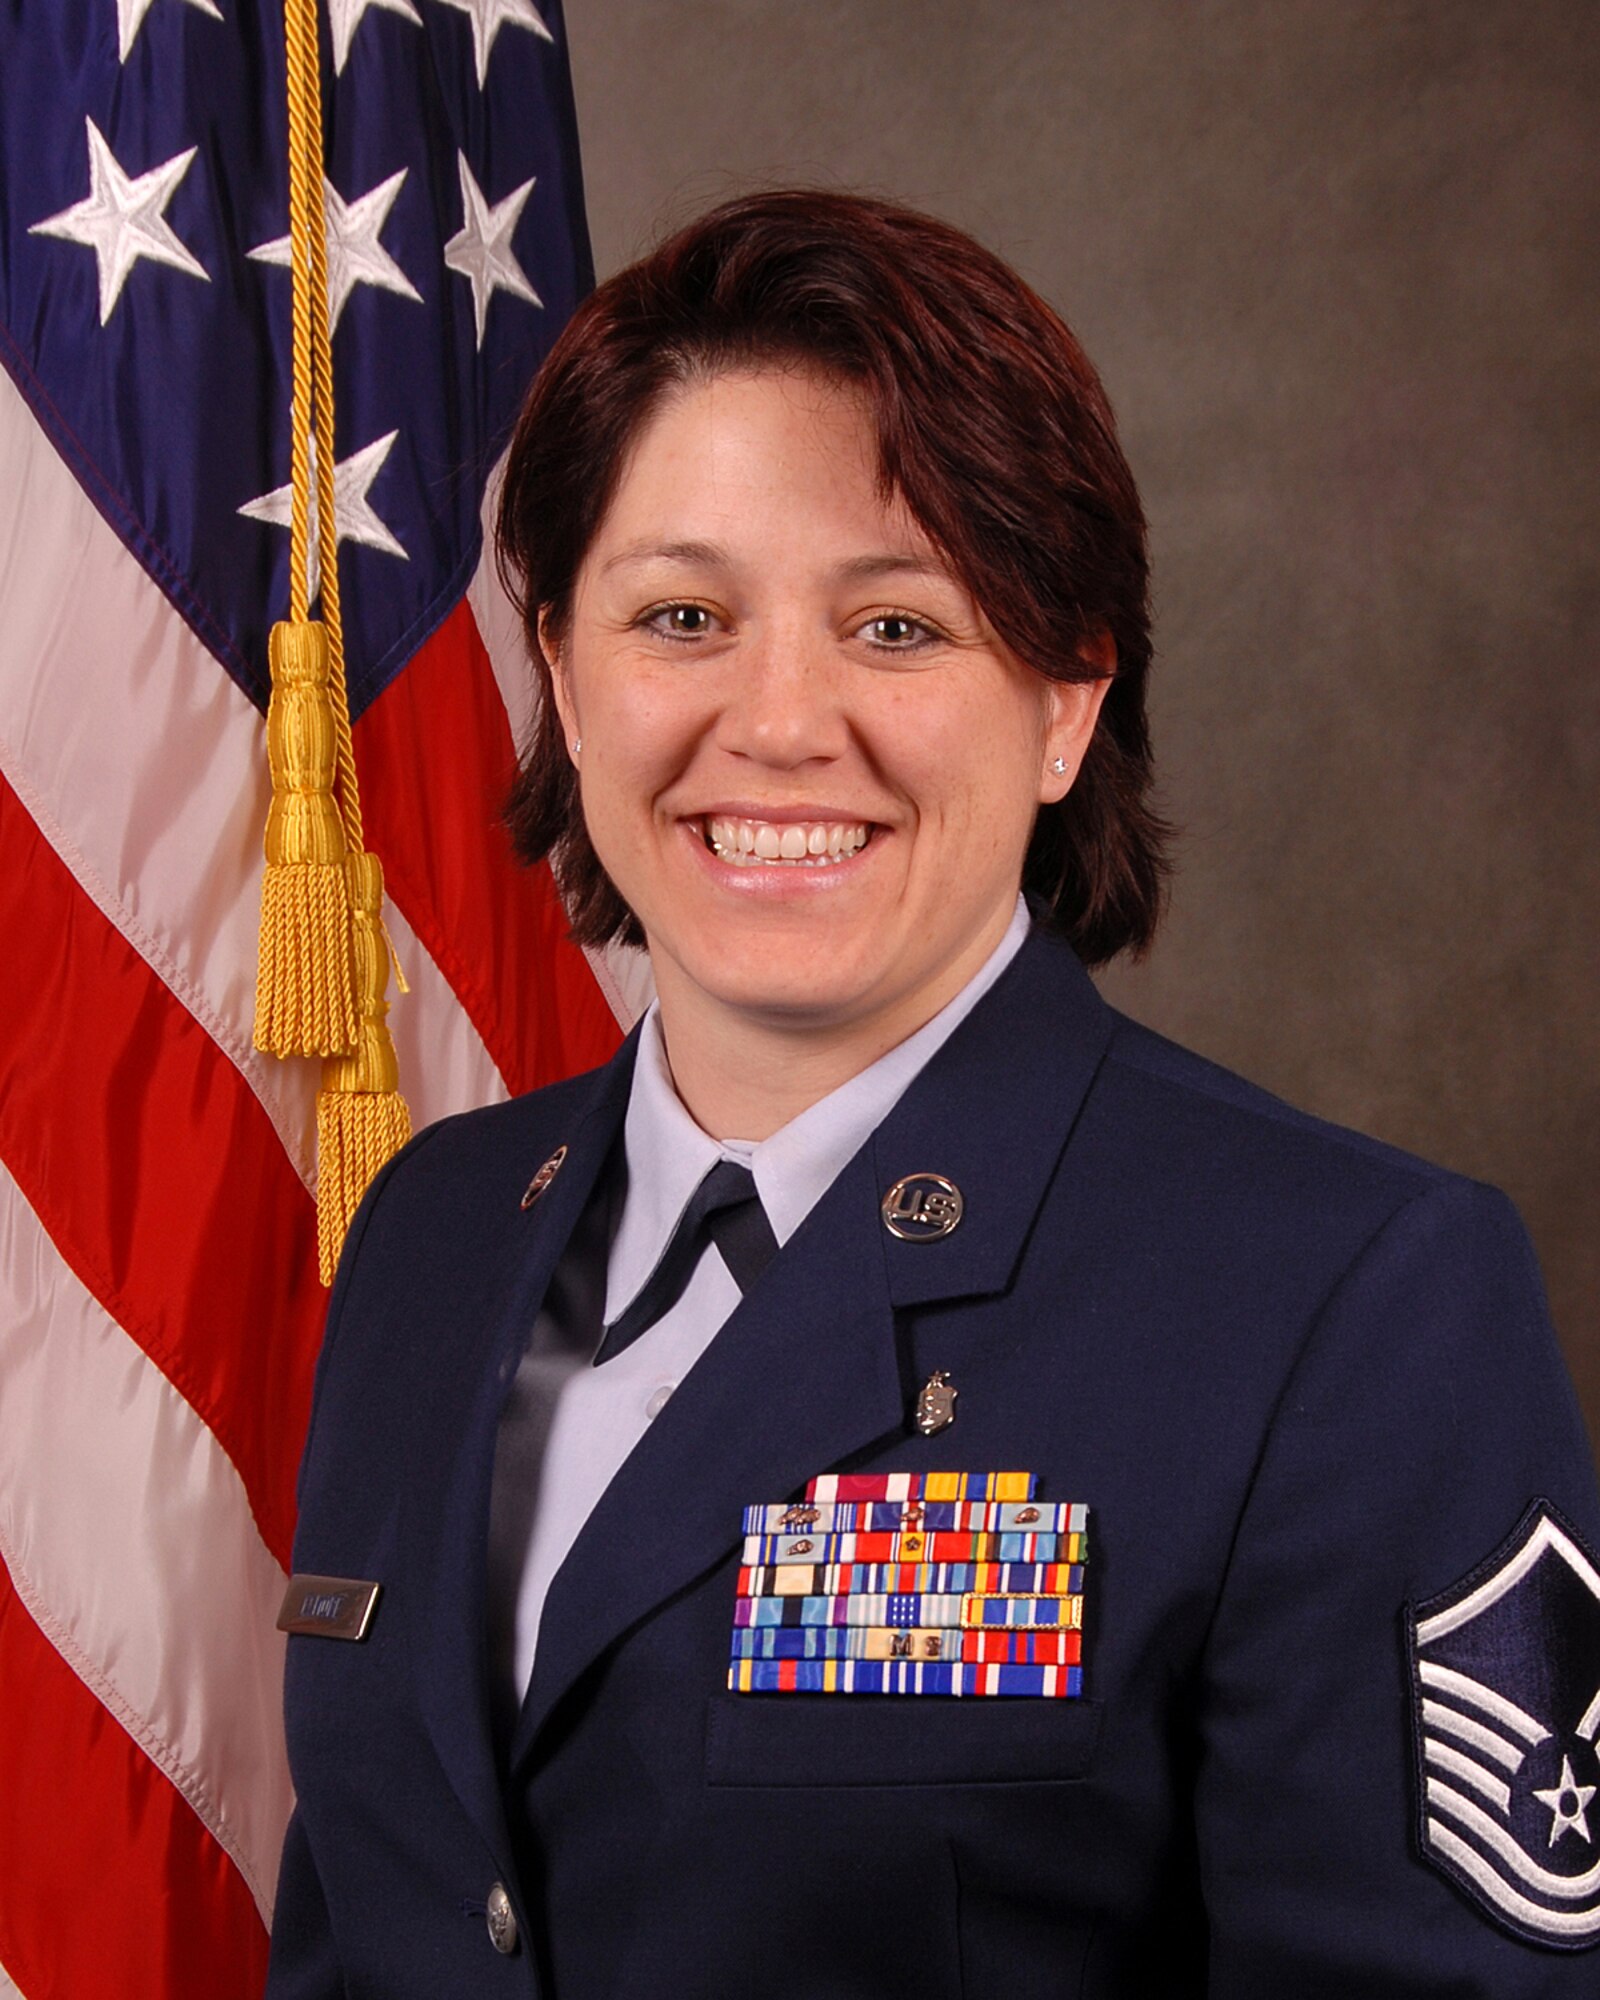 The Air Force Association hand-picked Master Sgt. Faith Elmore, a medic from the 184th Air Refueling Wing, to be a member of this year's AFA Team of the Year. (Air Force photo)